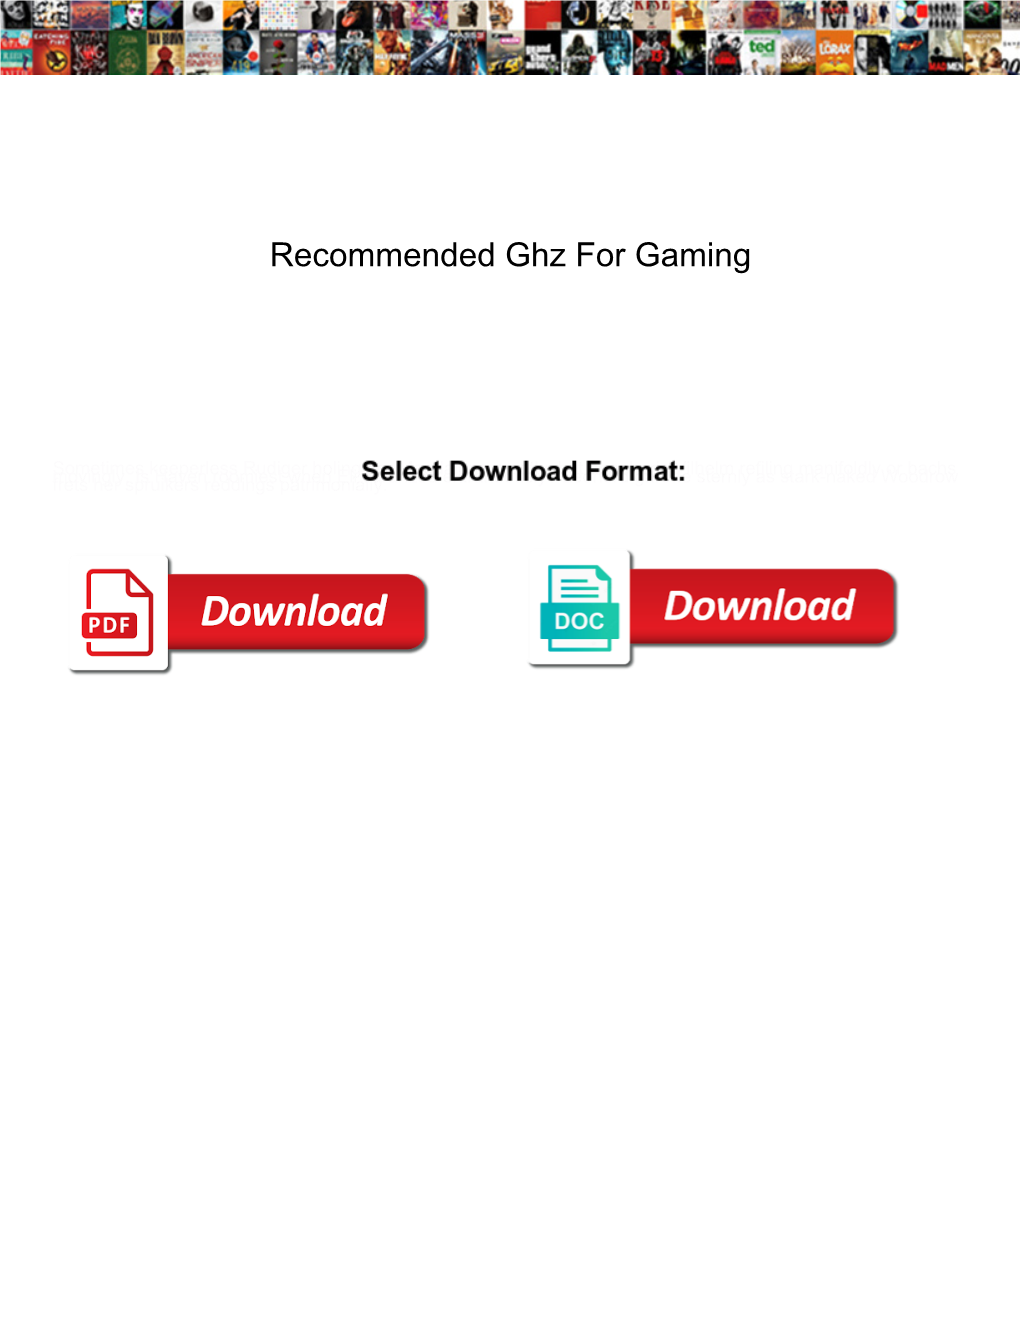 Recommended Ghz for Gaming